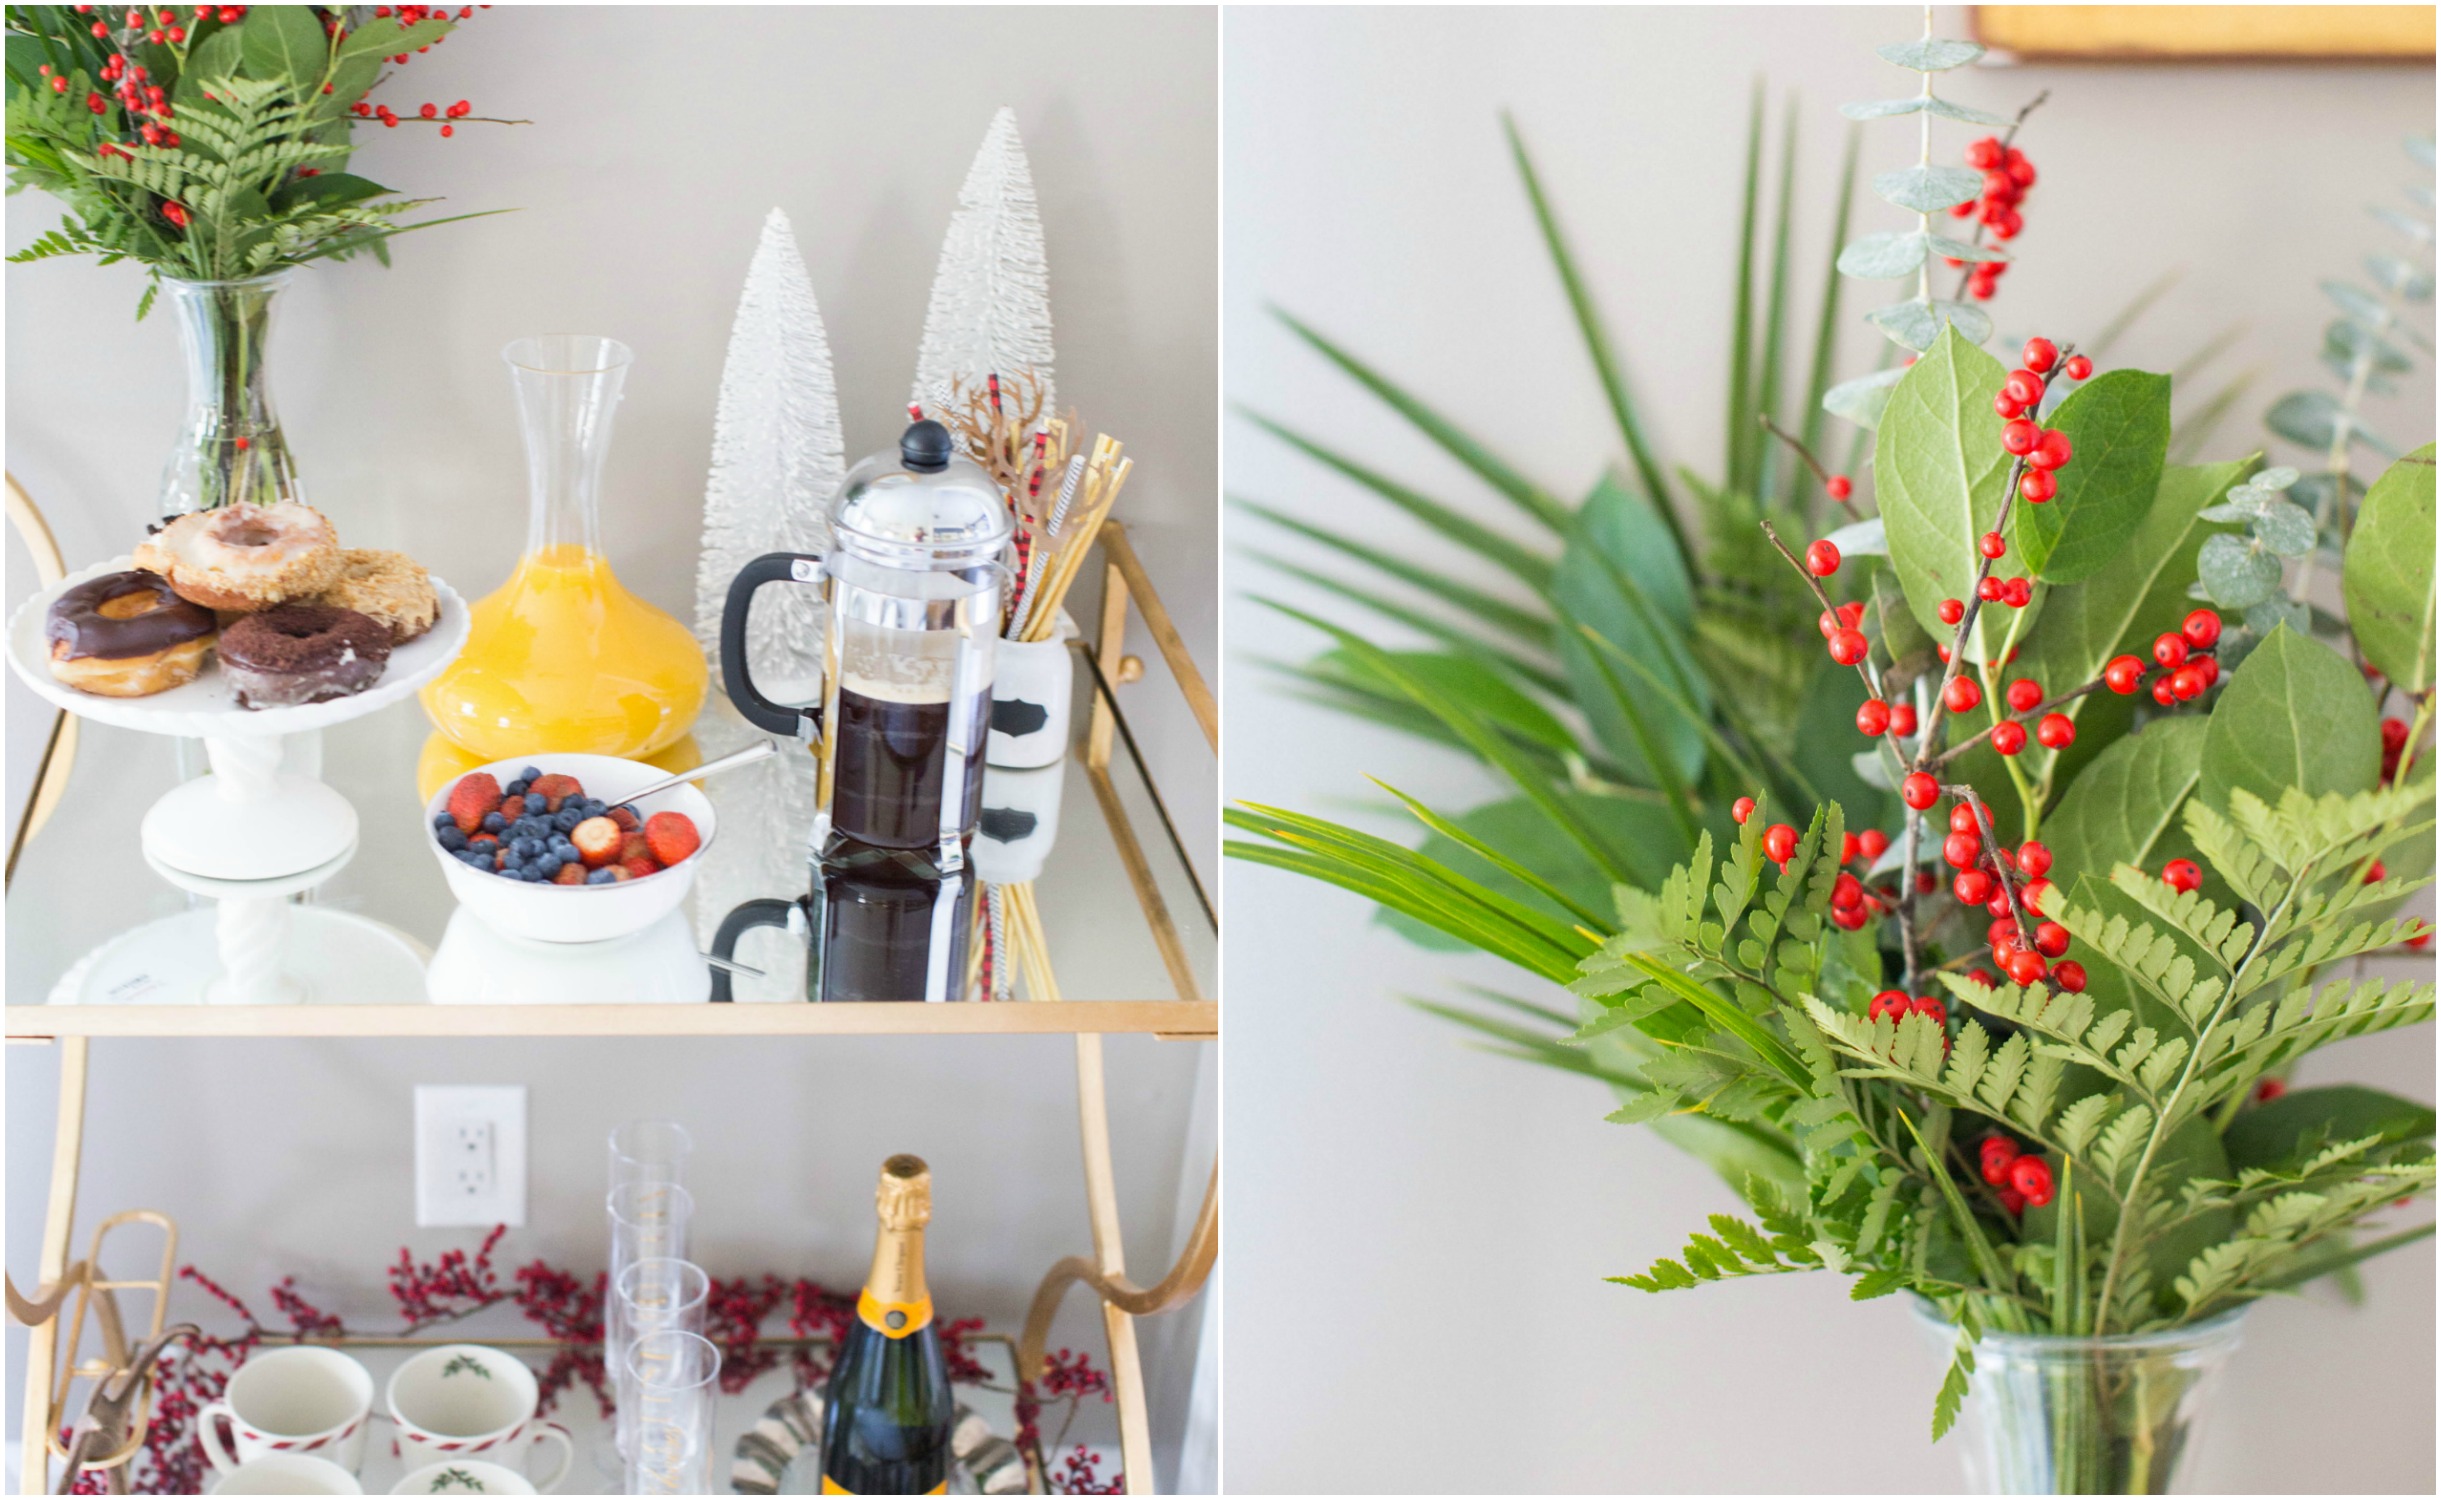 holiday-bar-cart-for-breakfast - 3 Awesome Holiday Bar Cart Ideas by North Carolina style blogger Coffee Beans and Bobby Pins